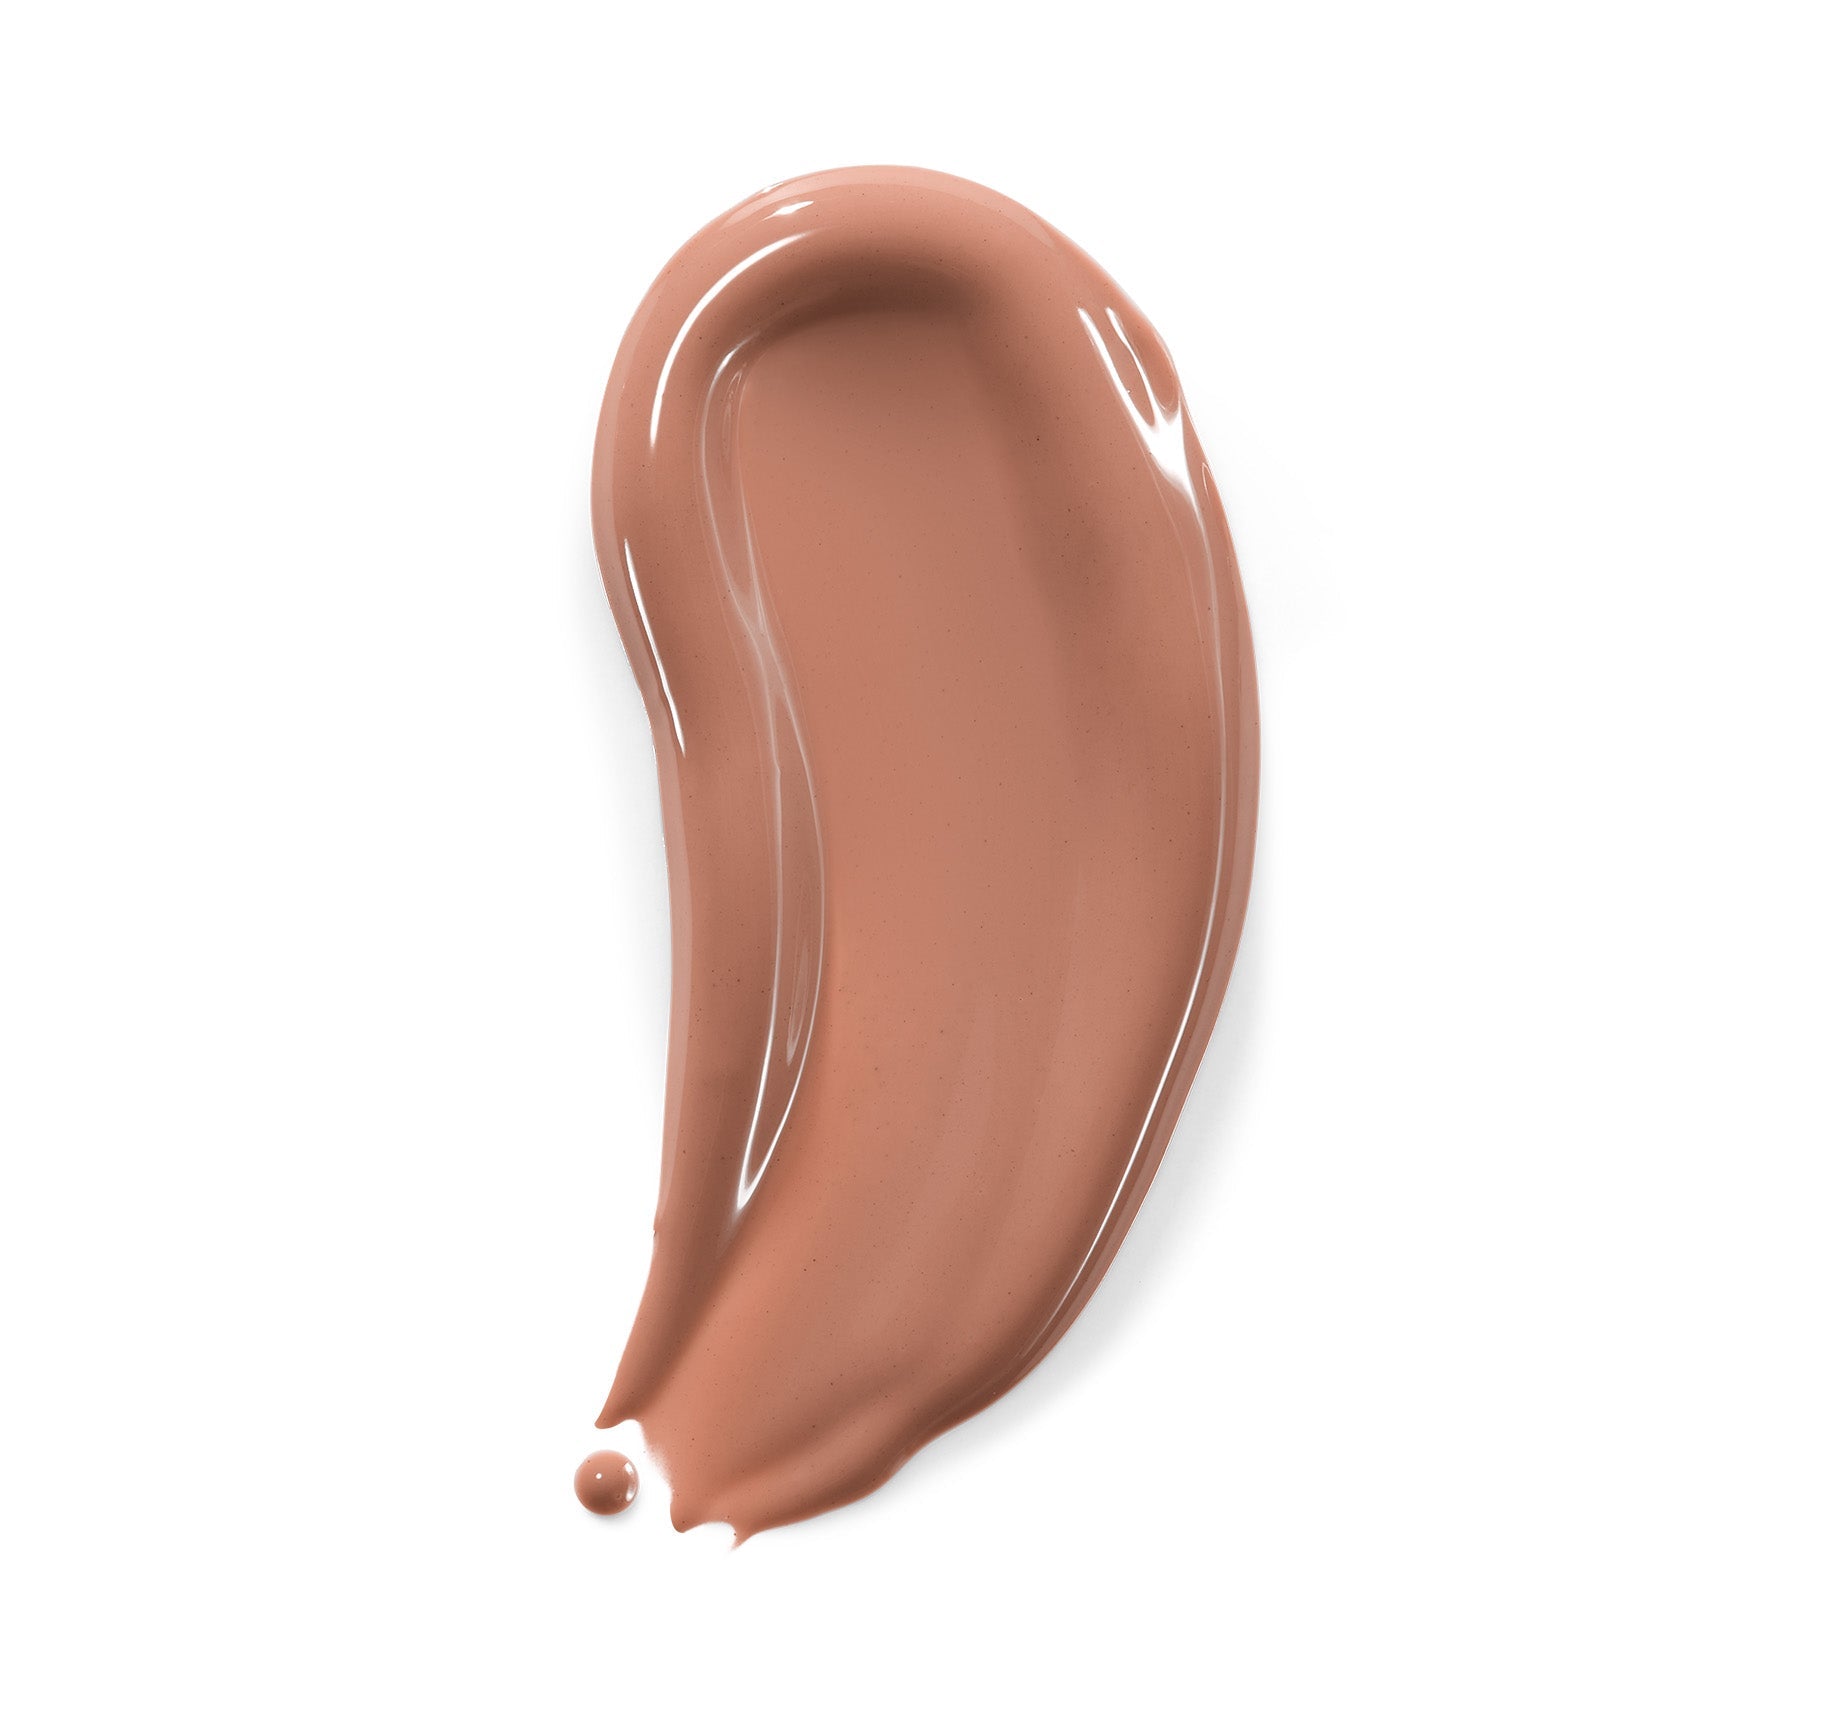 Dripglass Drenched High Pigment Lip Gloss - Naked Dip - Image 2